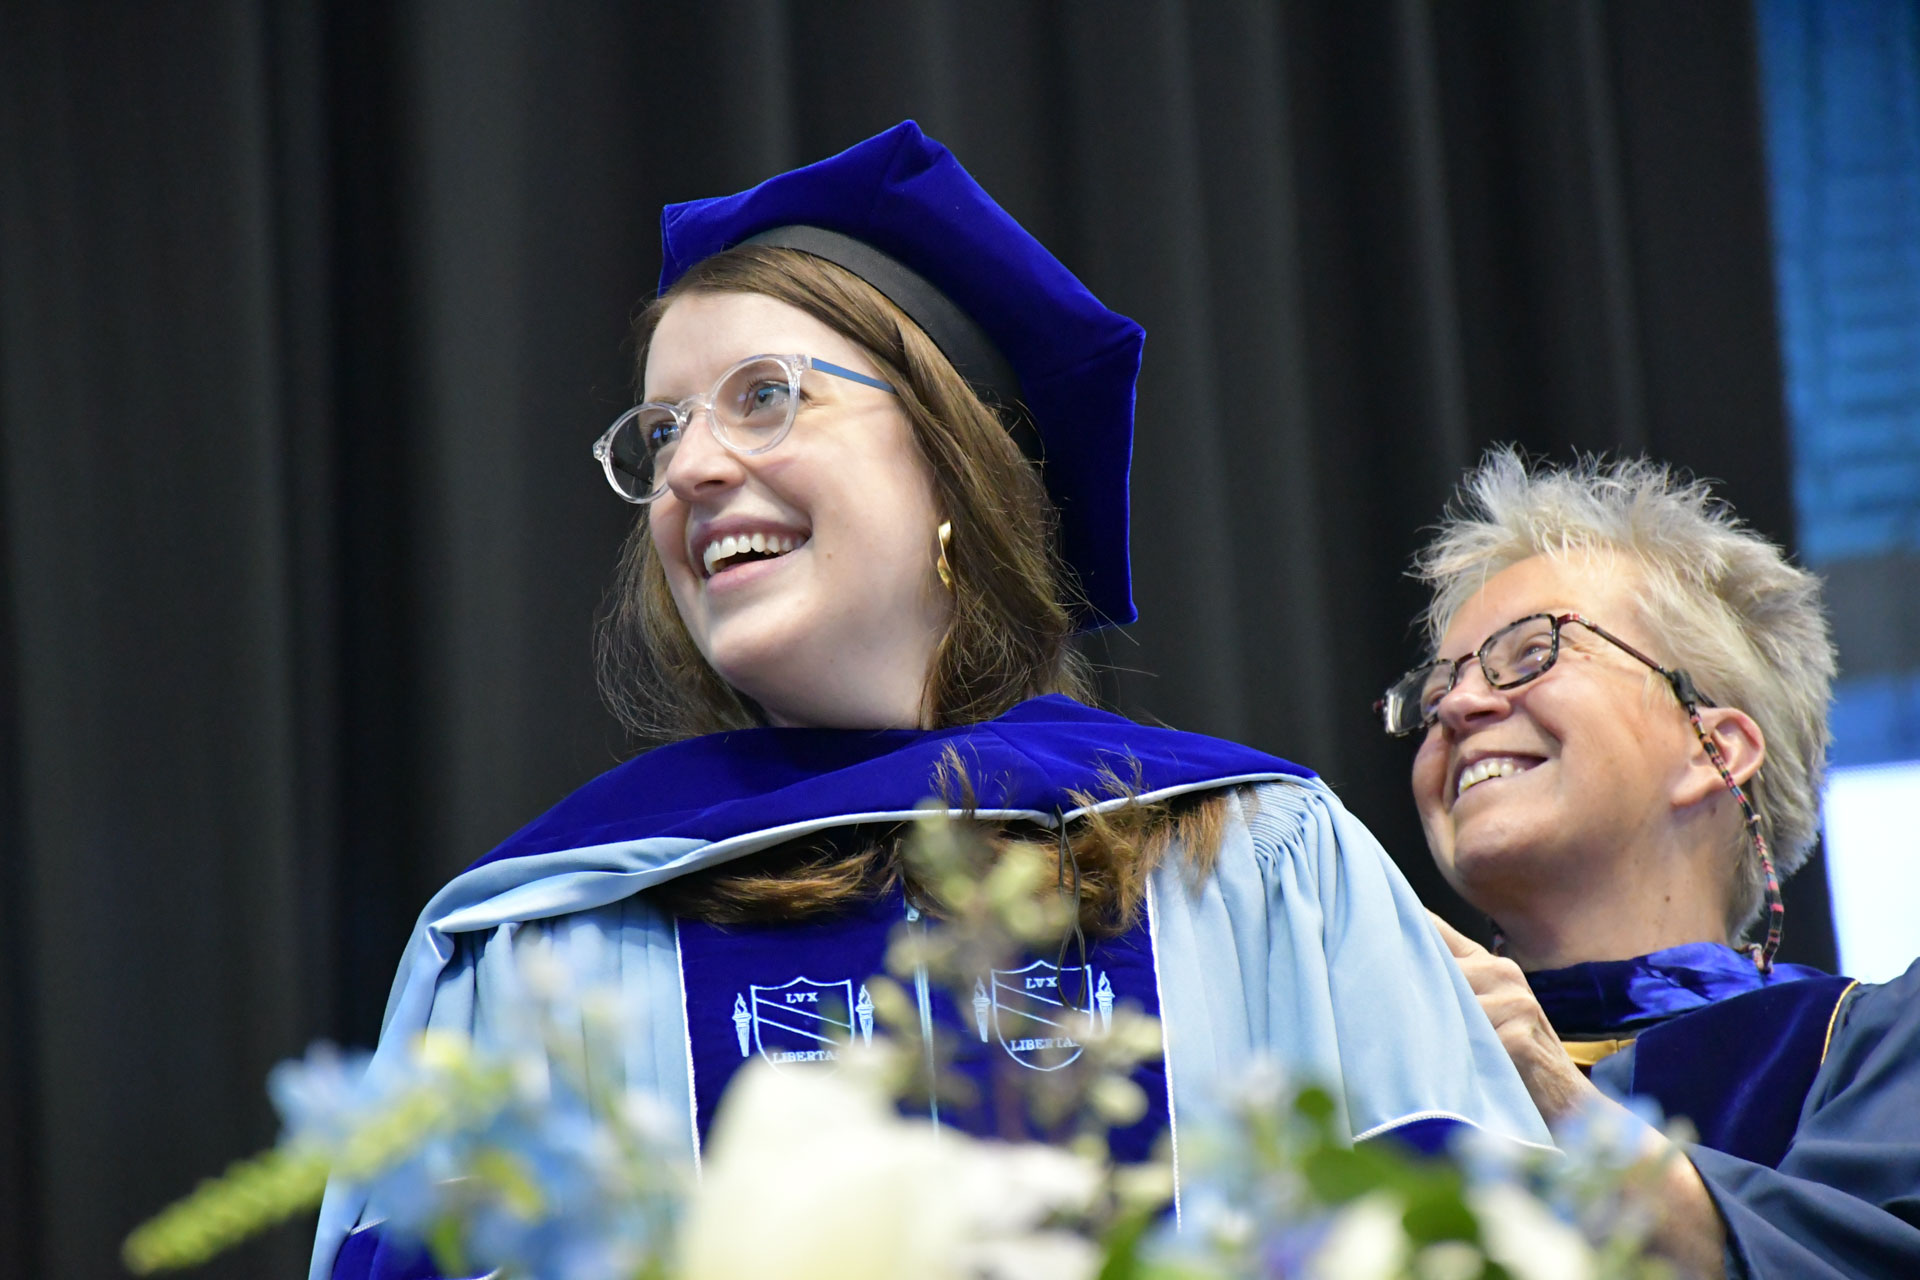 Triumph, resilience, hope—the 2022 doctoral hooding ceremony